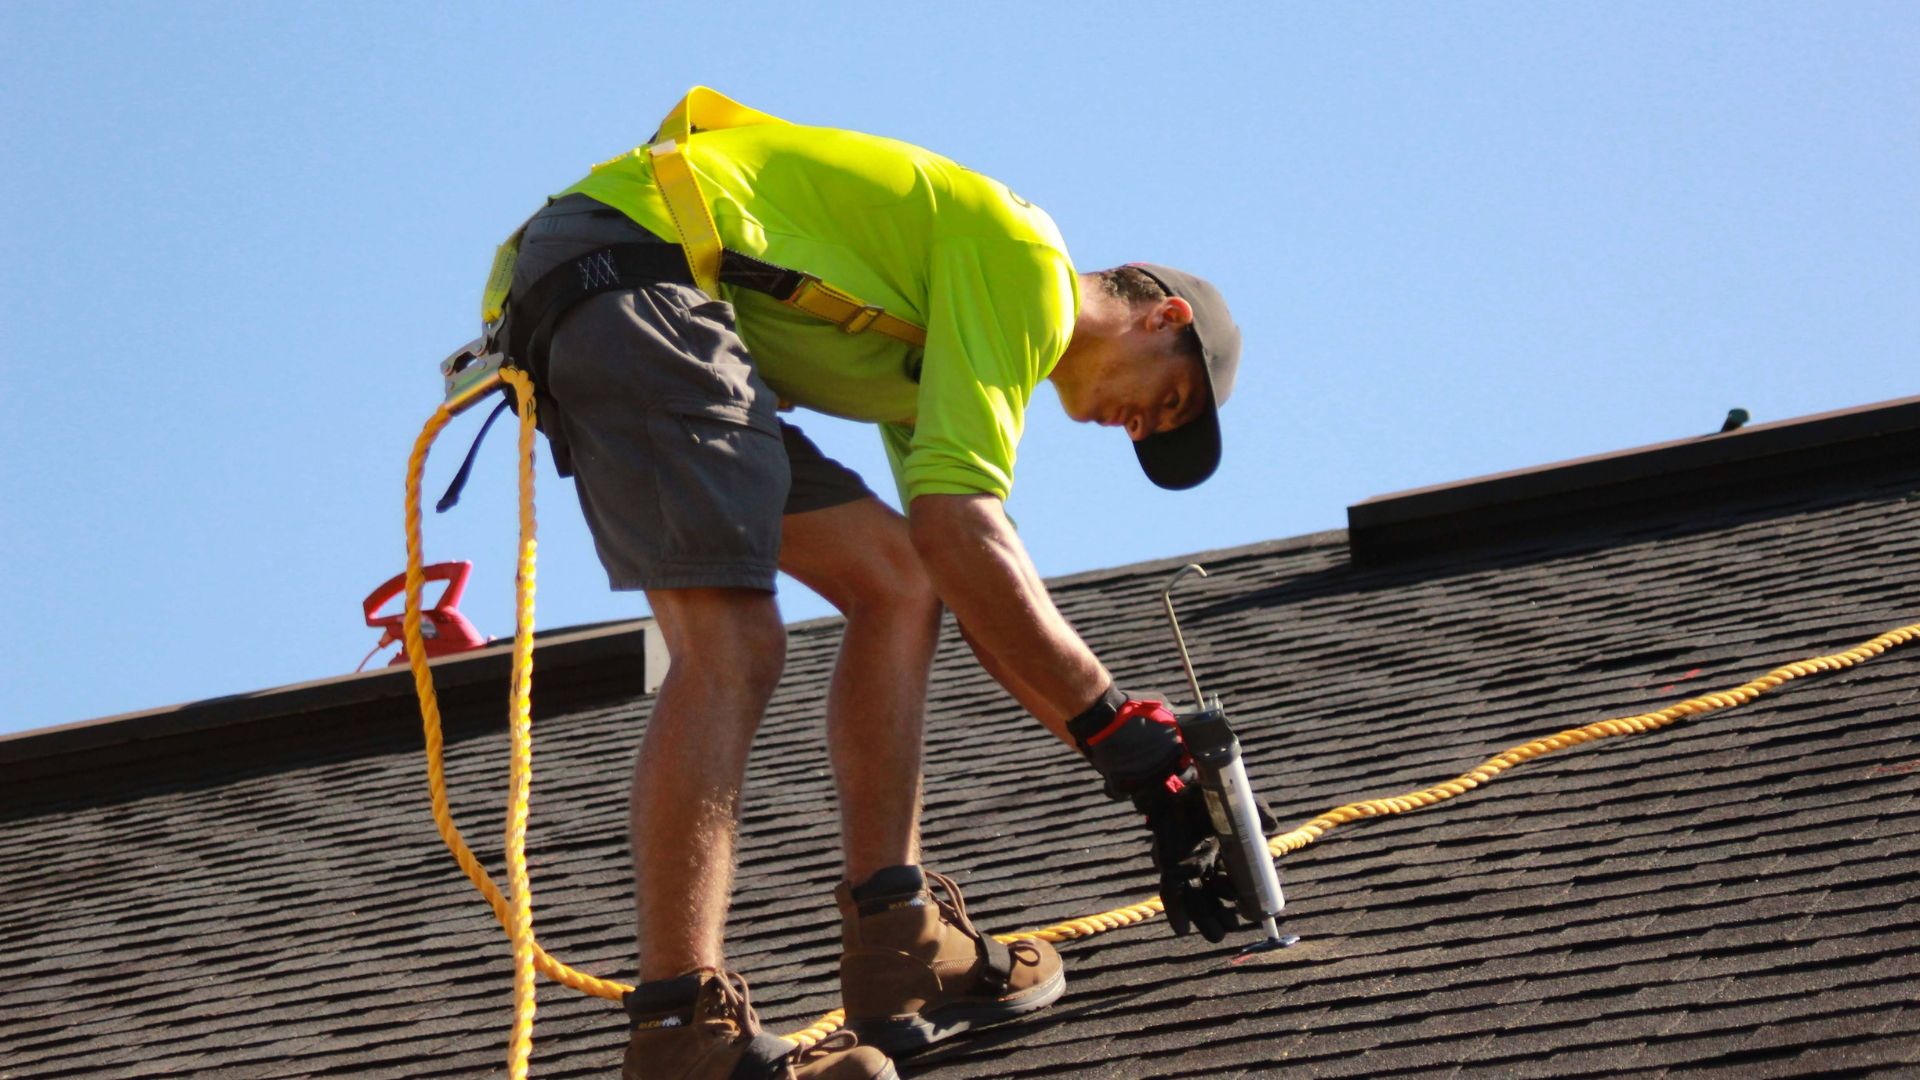 Contractor repairing a roof